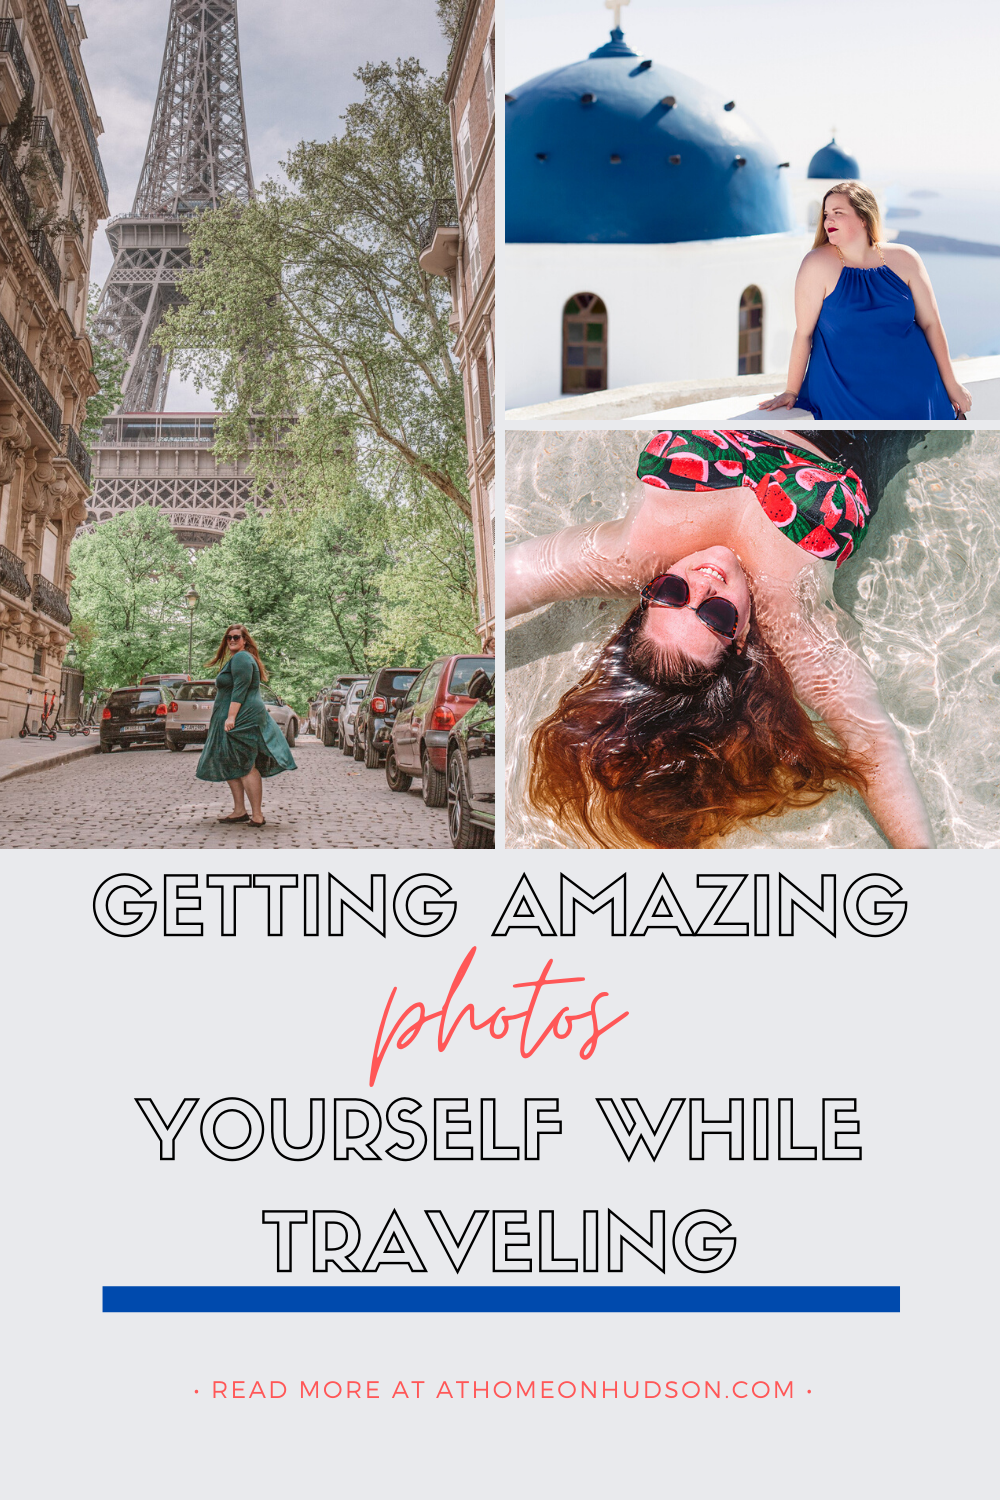 Getting amazing photos to share on social media has never been easier than with these tips and tricks that I have used extensively! Here is how to get incredible photos of yourself while traveling from a professional photographer.